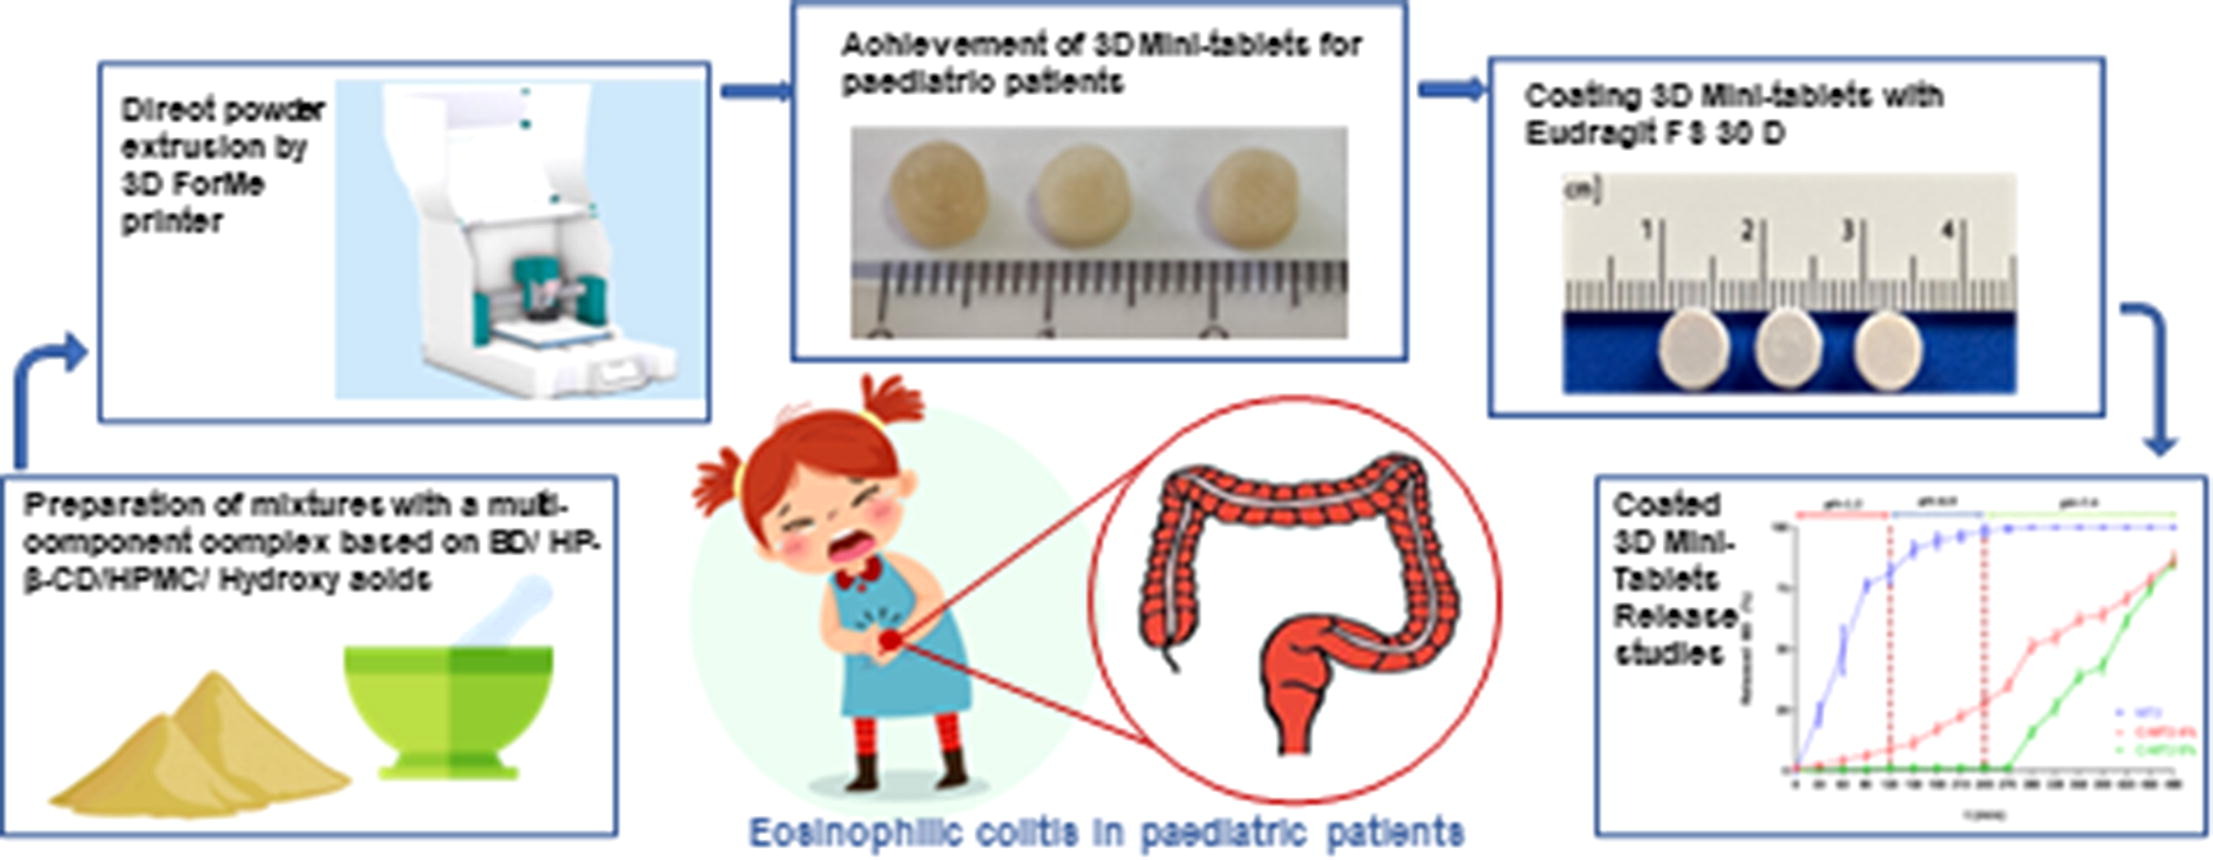 Direct cyclodextrin based powder extrusion 3D printing of budesonide loaded mini-tablets for the treatment of eosinophilic colitis in paediatric patients